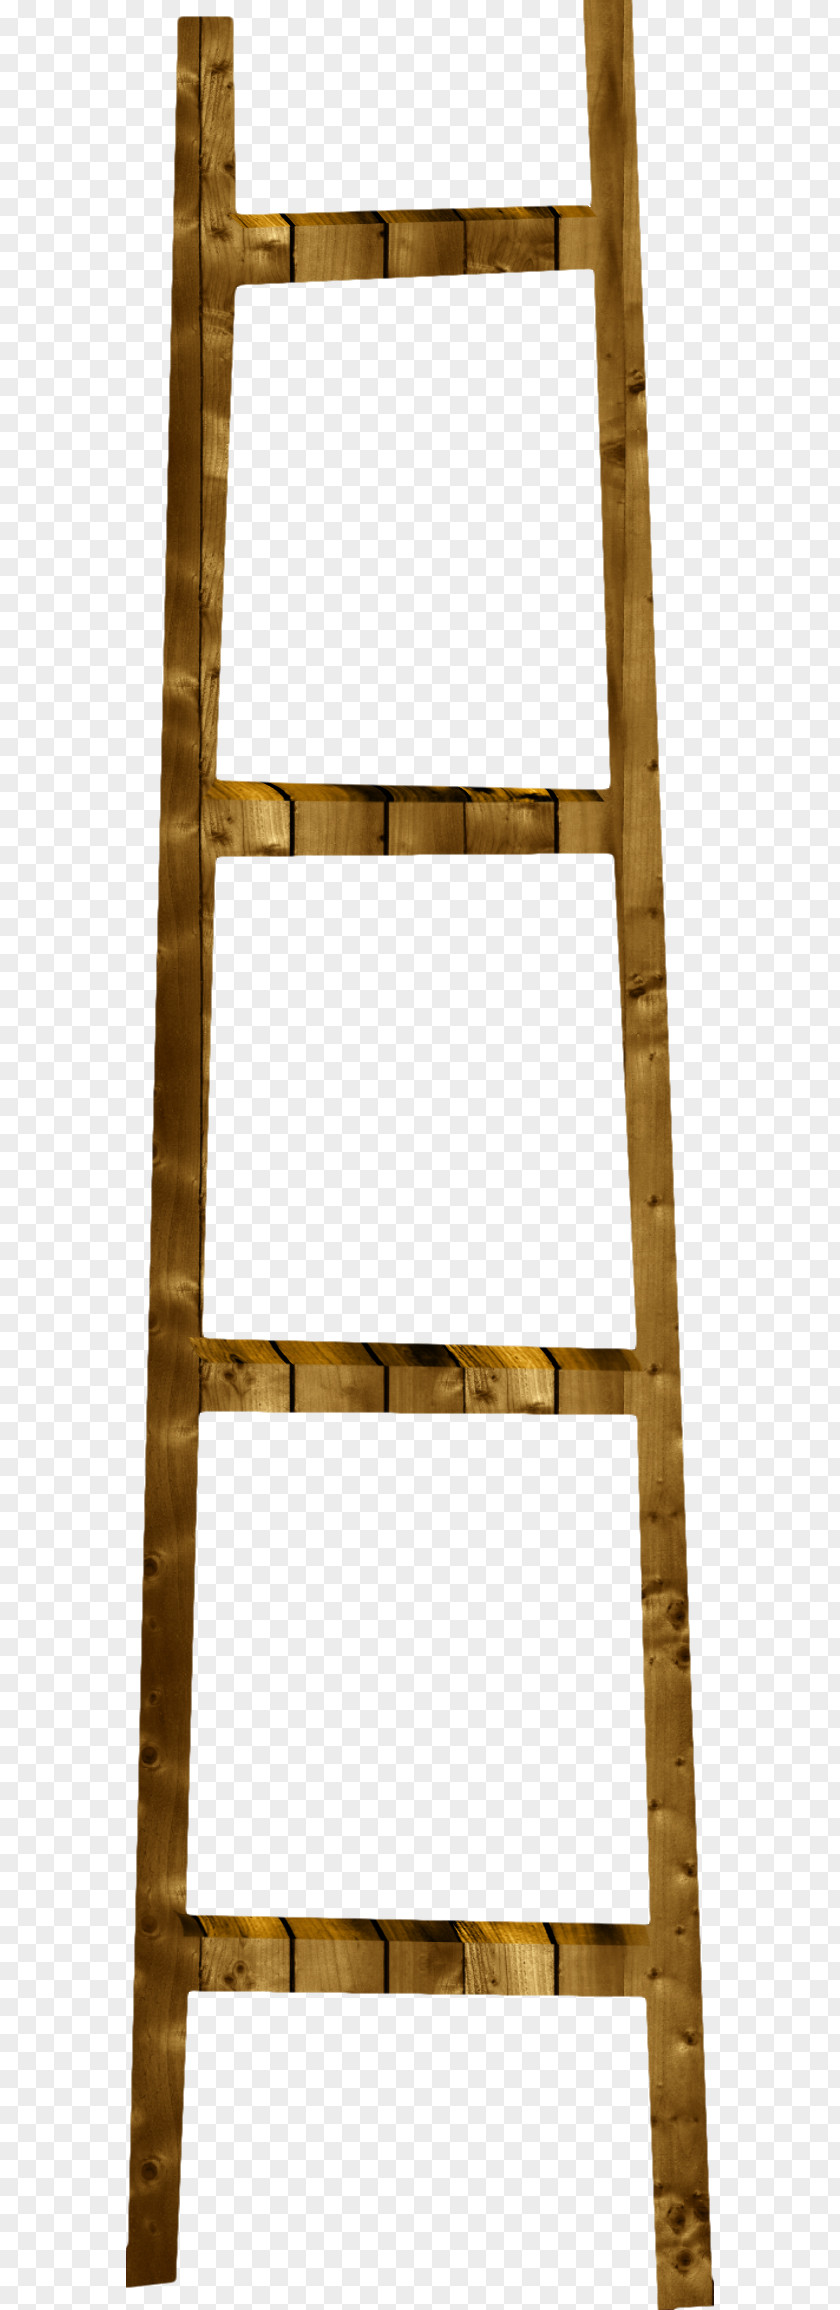 Ladders Wood Ladder Stairs PNG